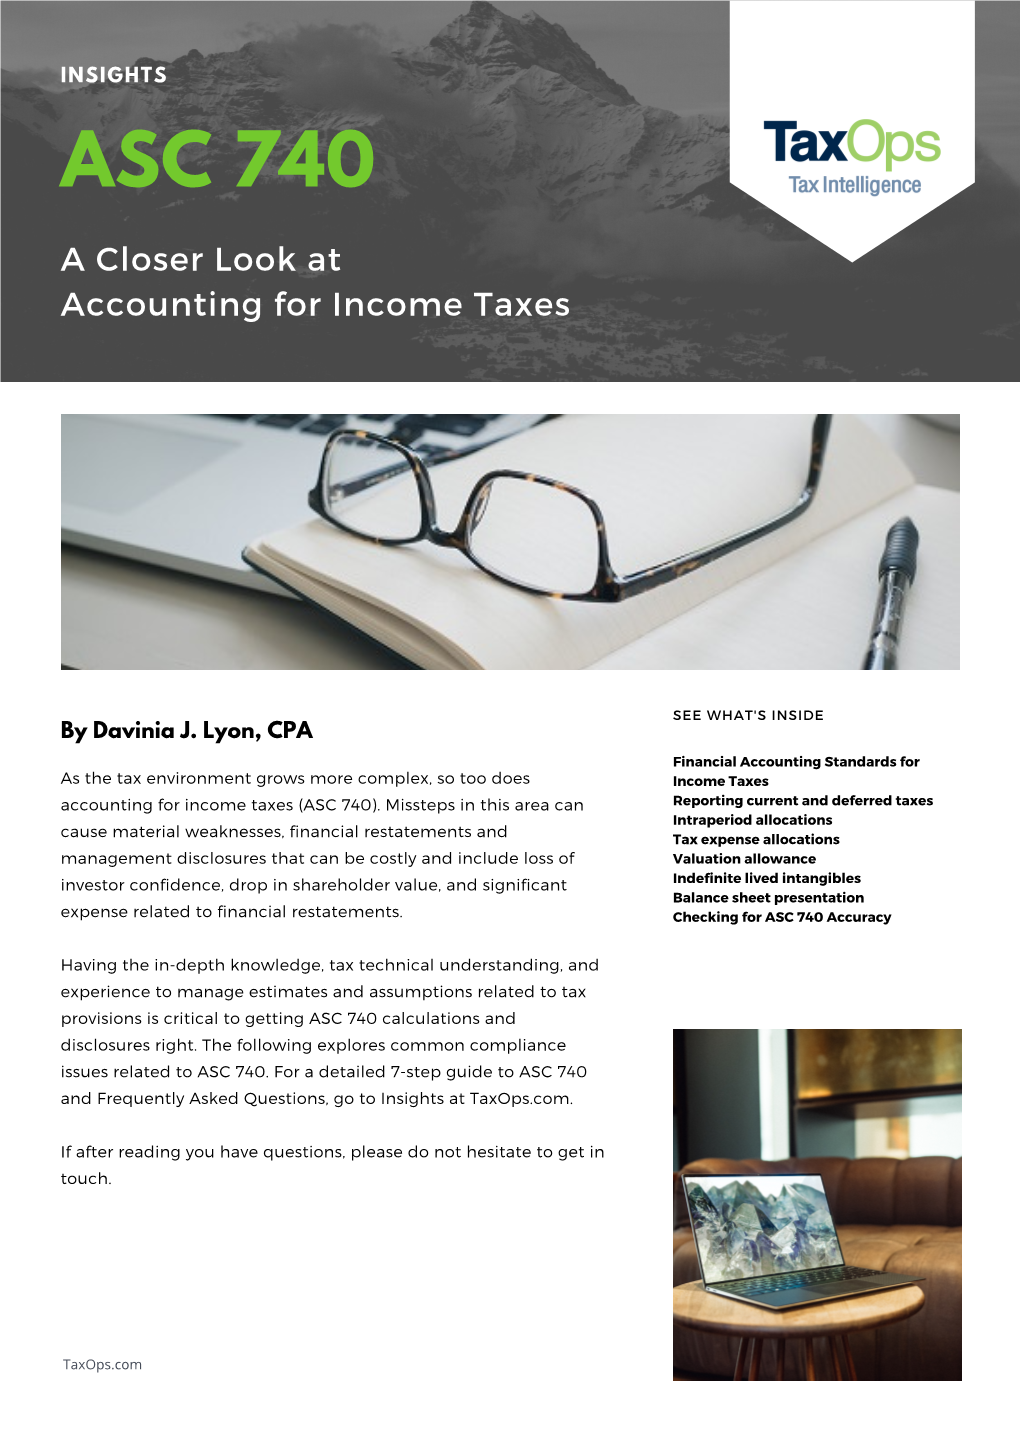 ASC 740 a Closer Look at Accounting for Income Taxes